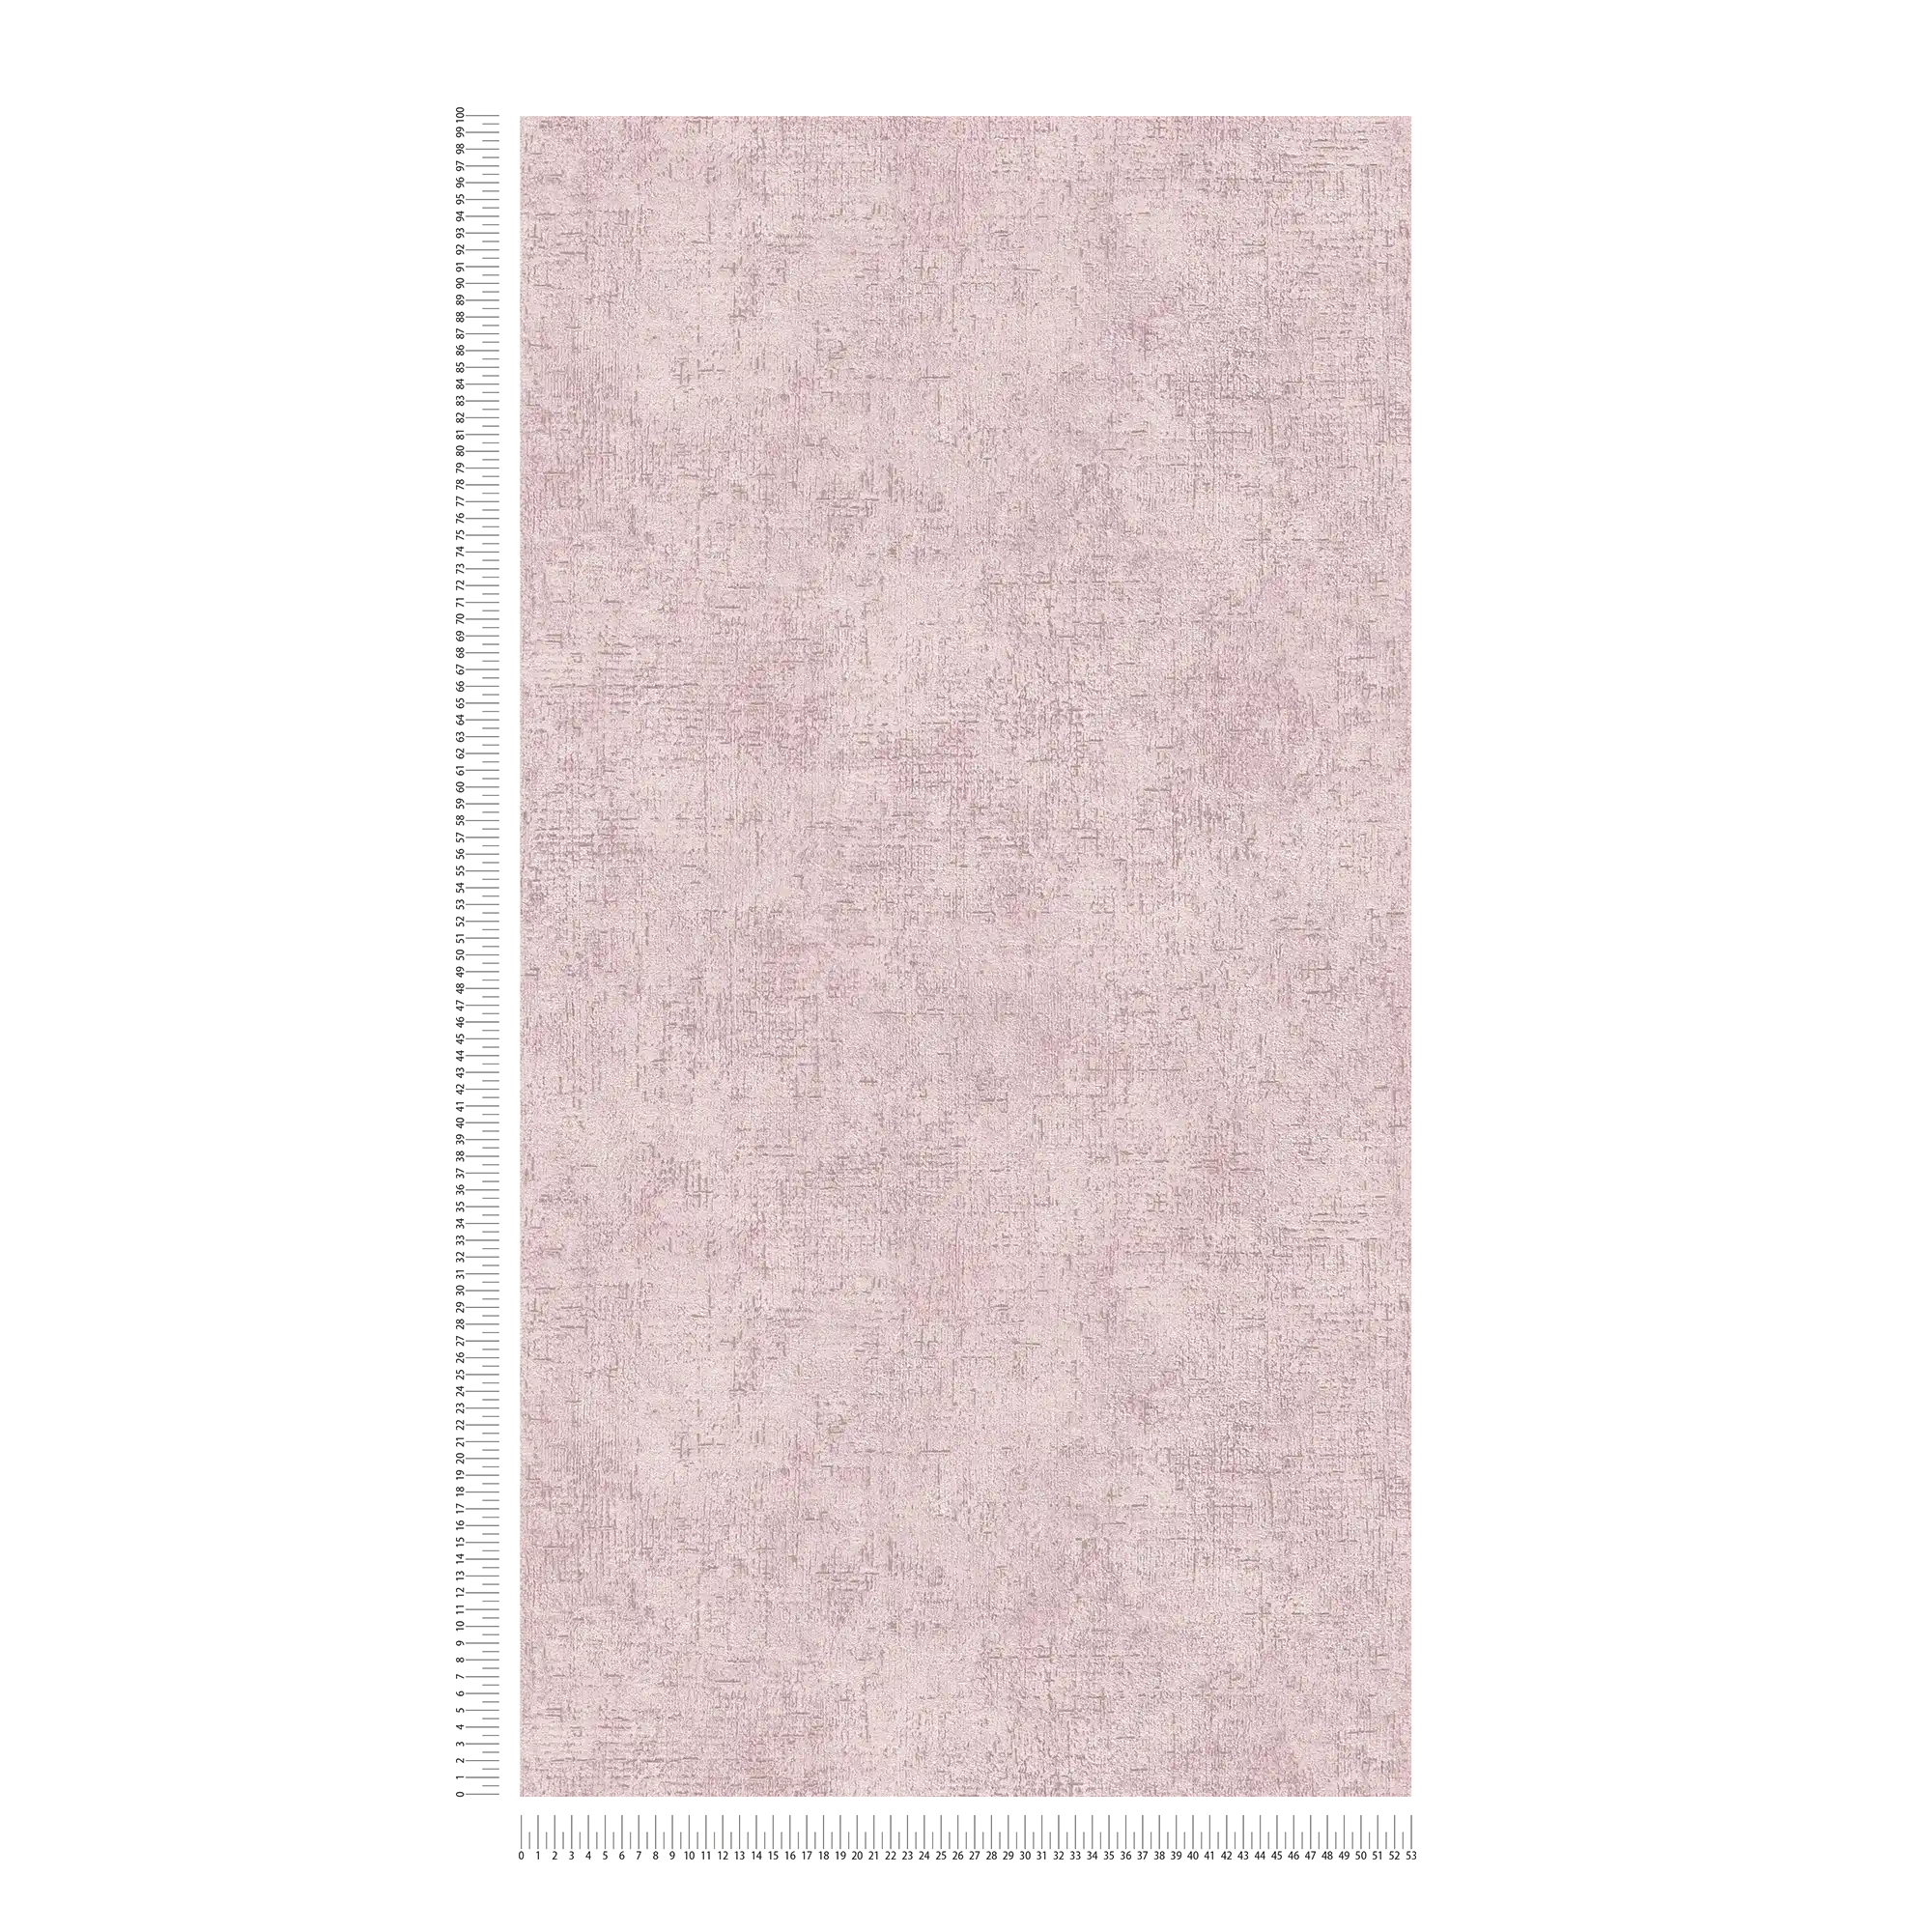             Non-woven wallpaper rustic plaster structure - pink, glossy
        